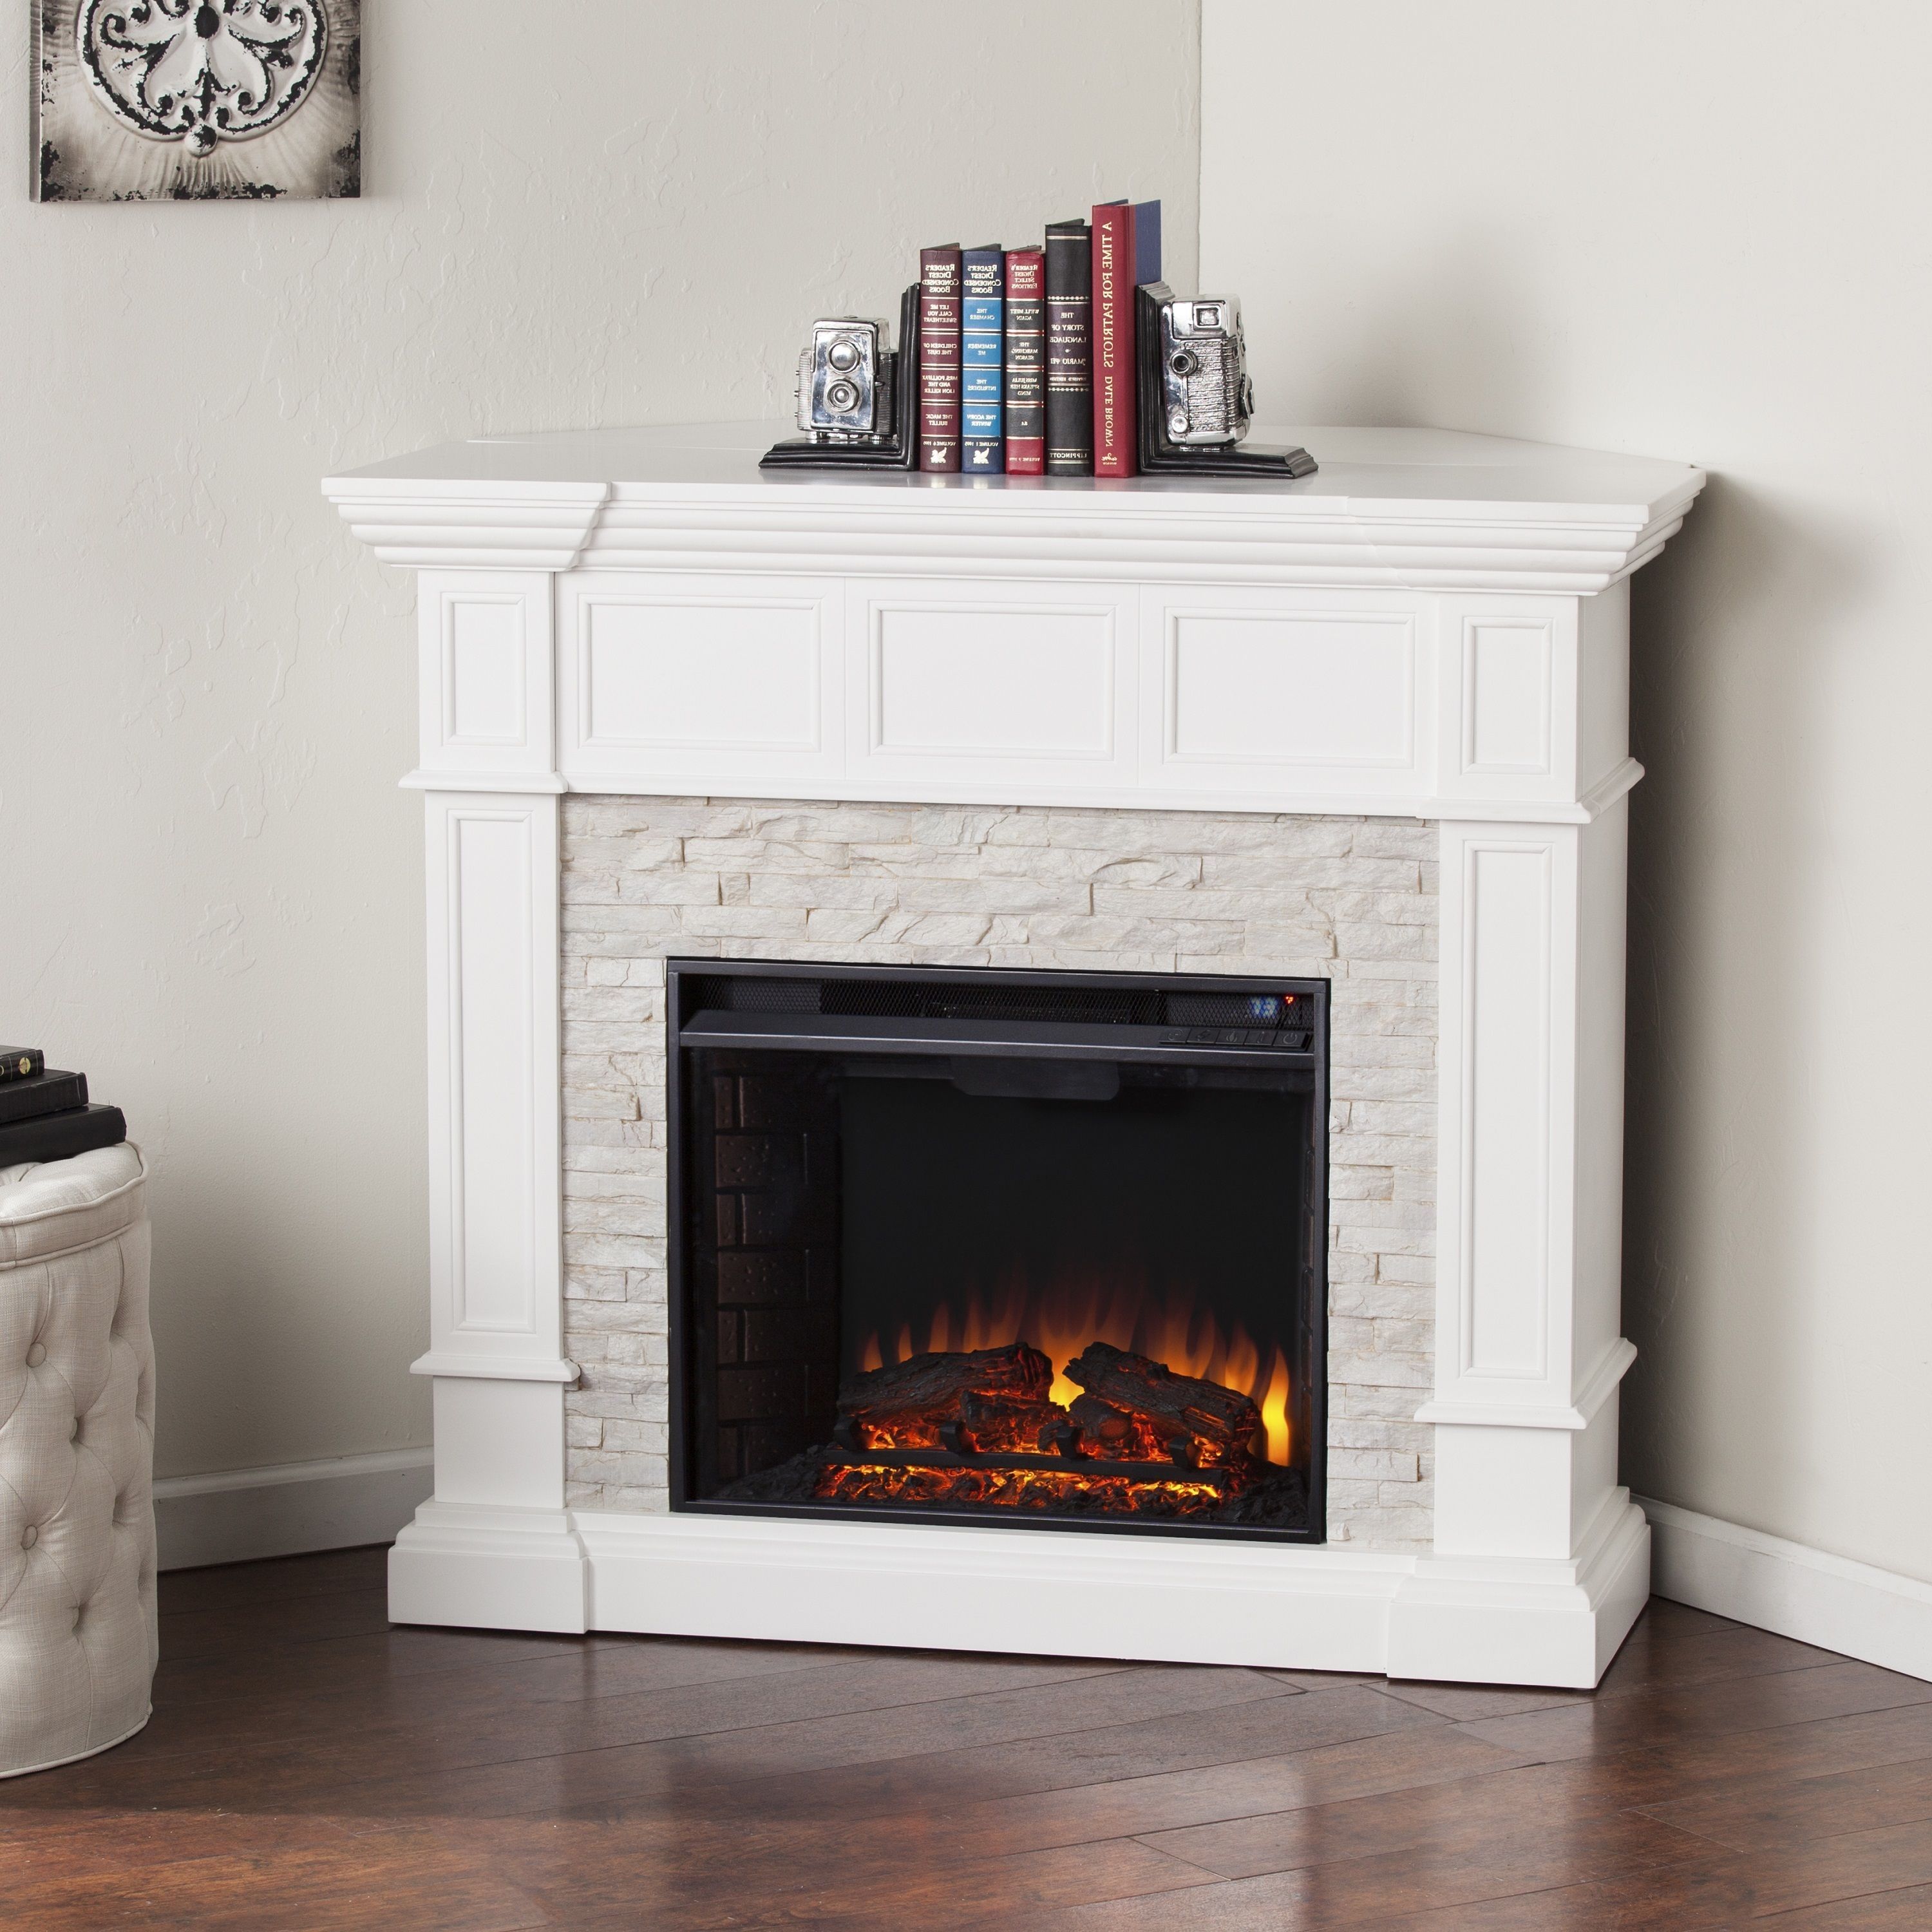 Corner Fireplace Furniture Arrangement New 33 Modern and Traditional Corner Fireplace Ideas Remodel